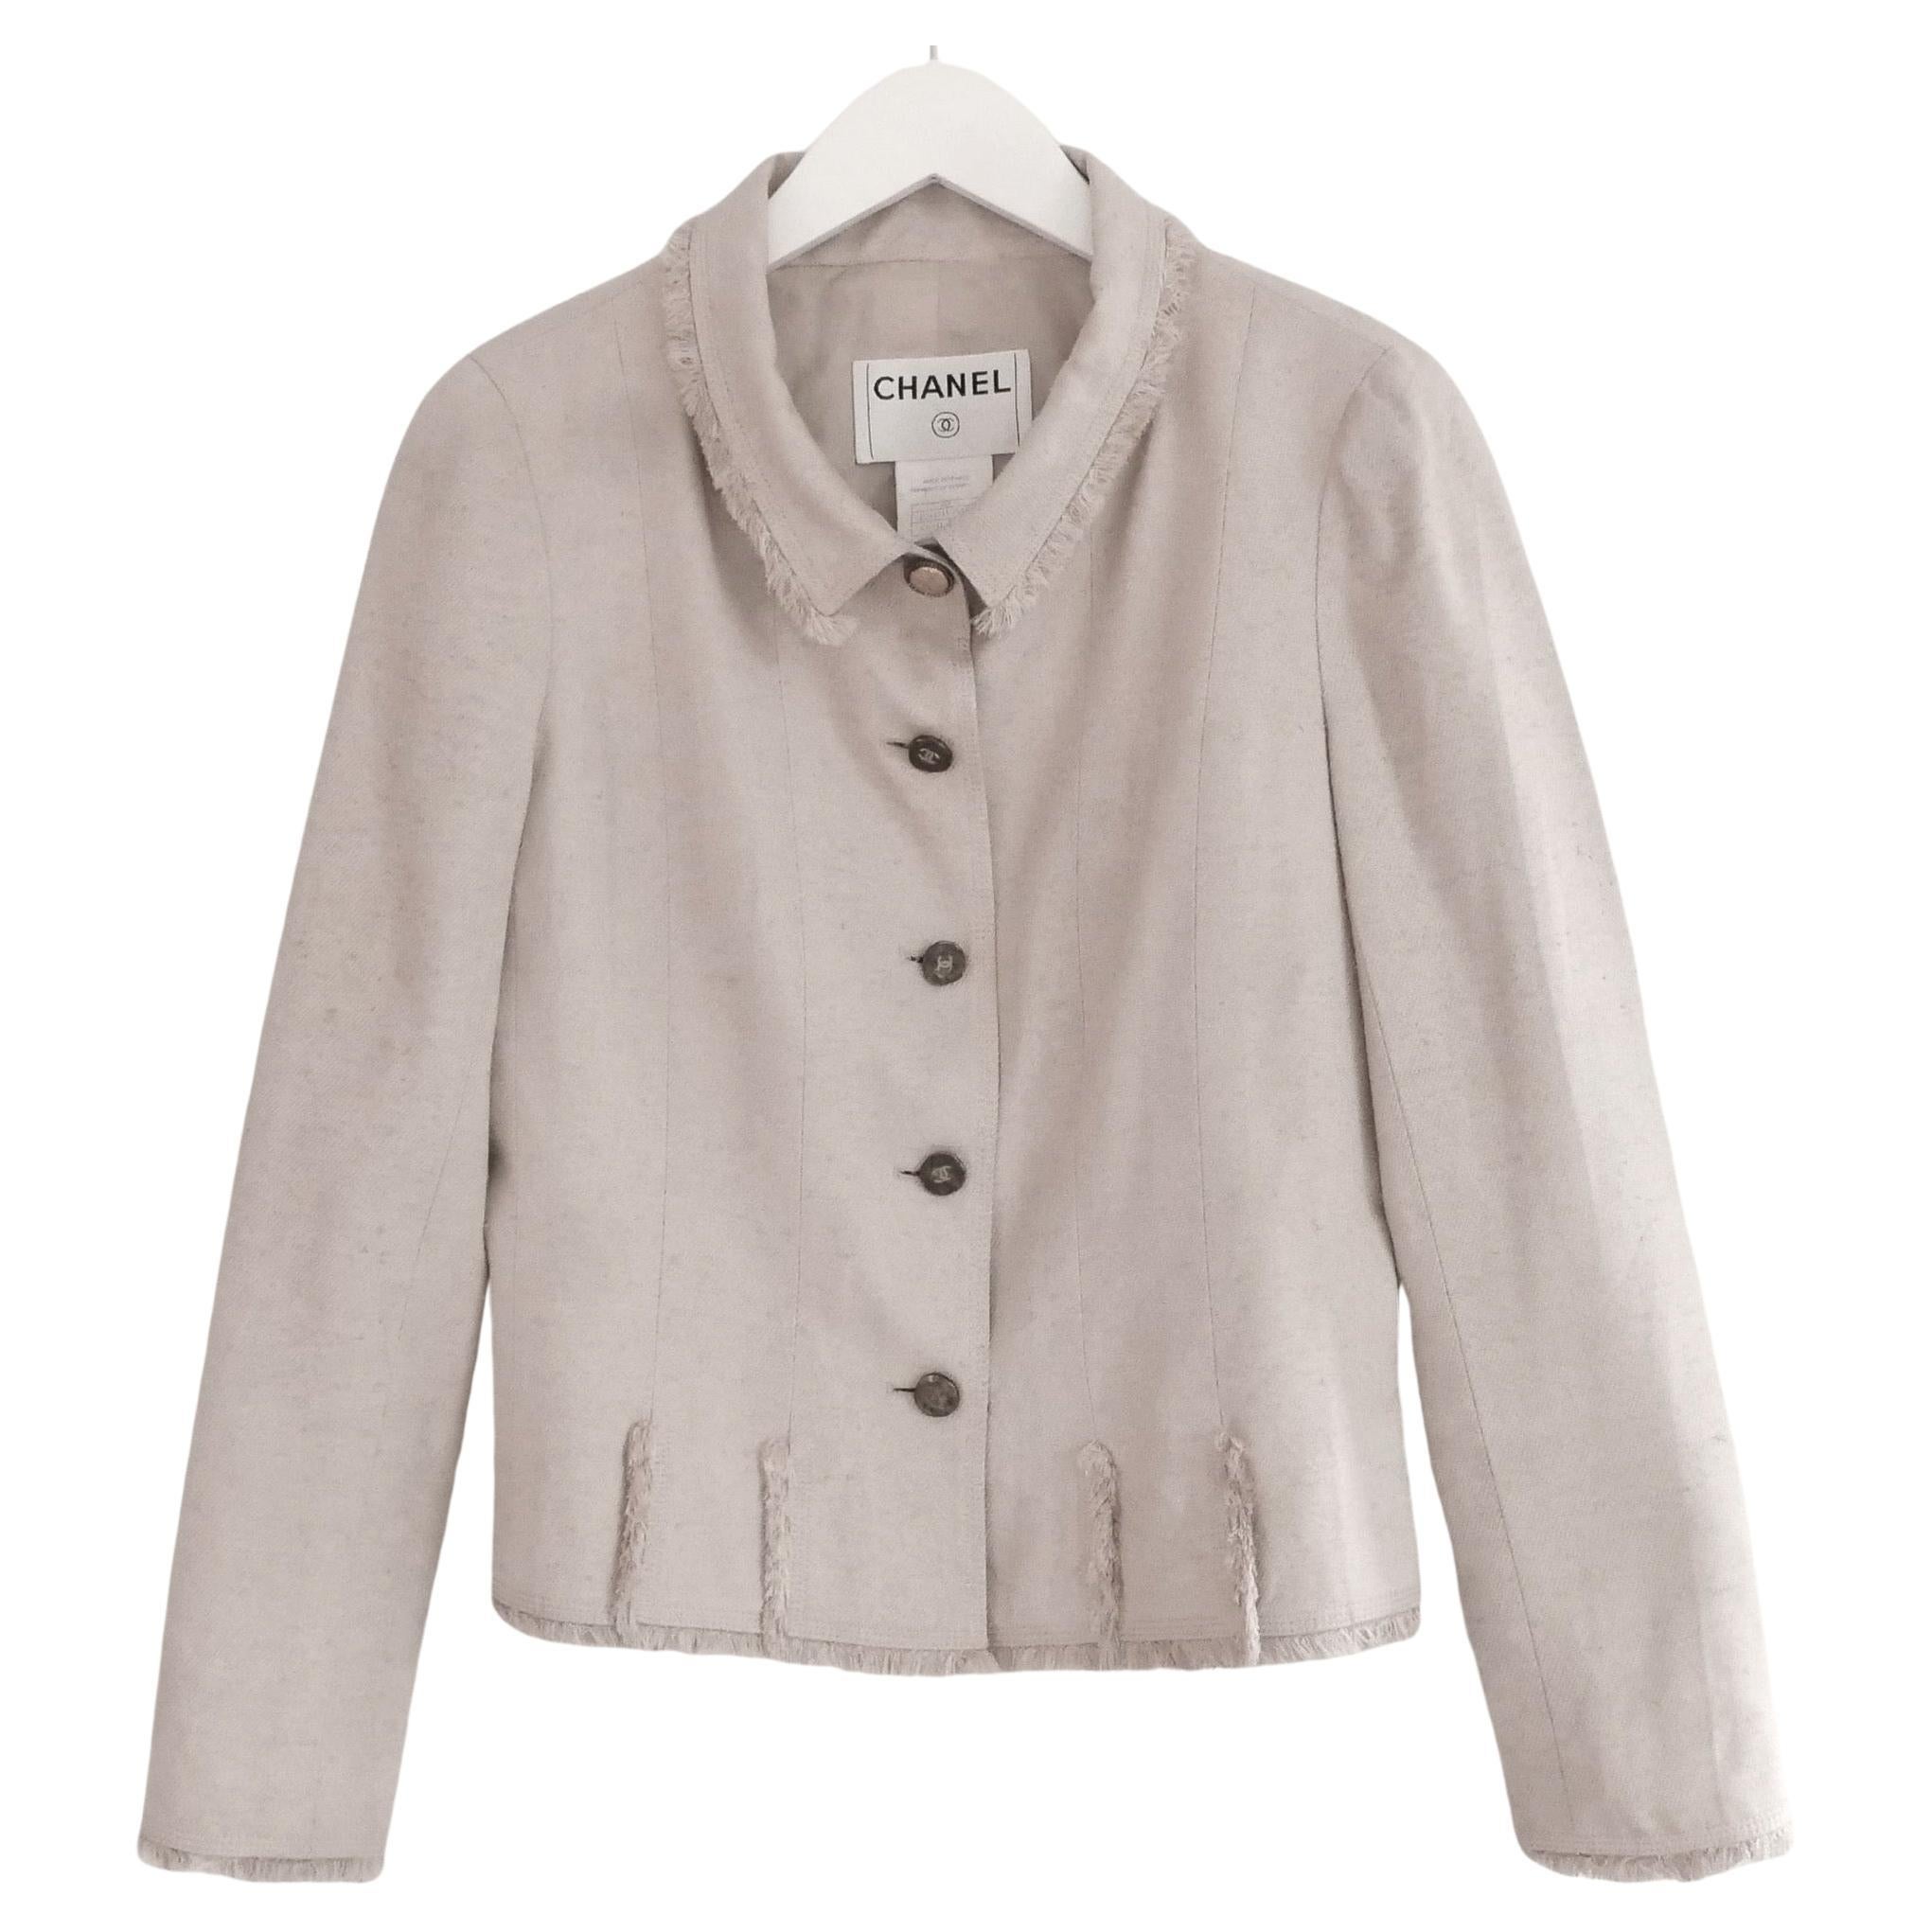 Chanel-Style-Boucle-Jacket-alexander-mcqueen-frayed-edge-collarless-jacket  - Corporate Style Story